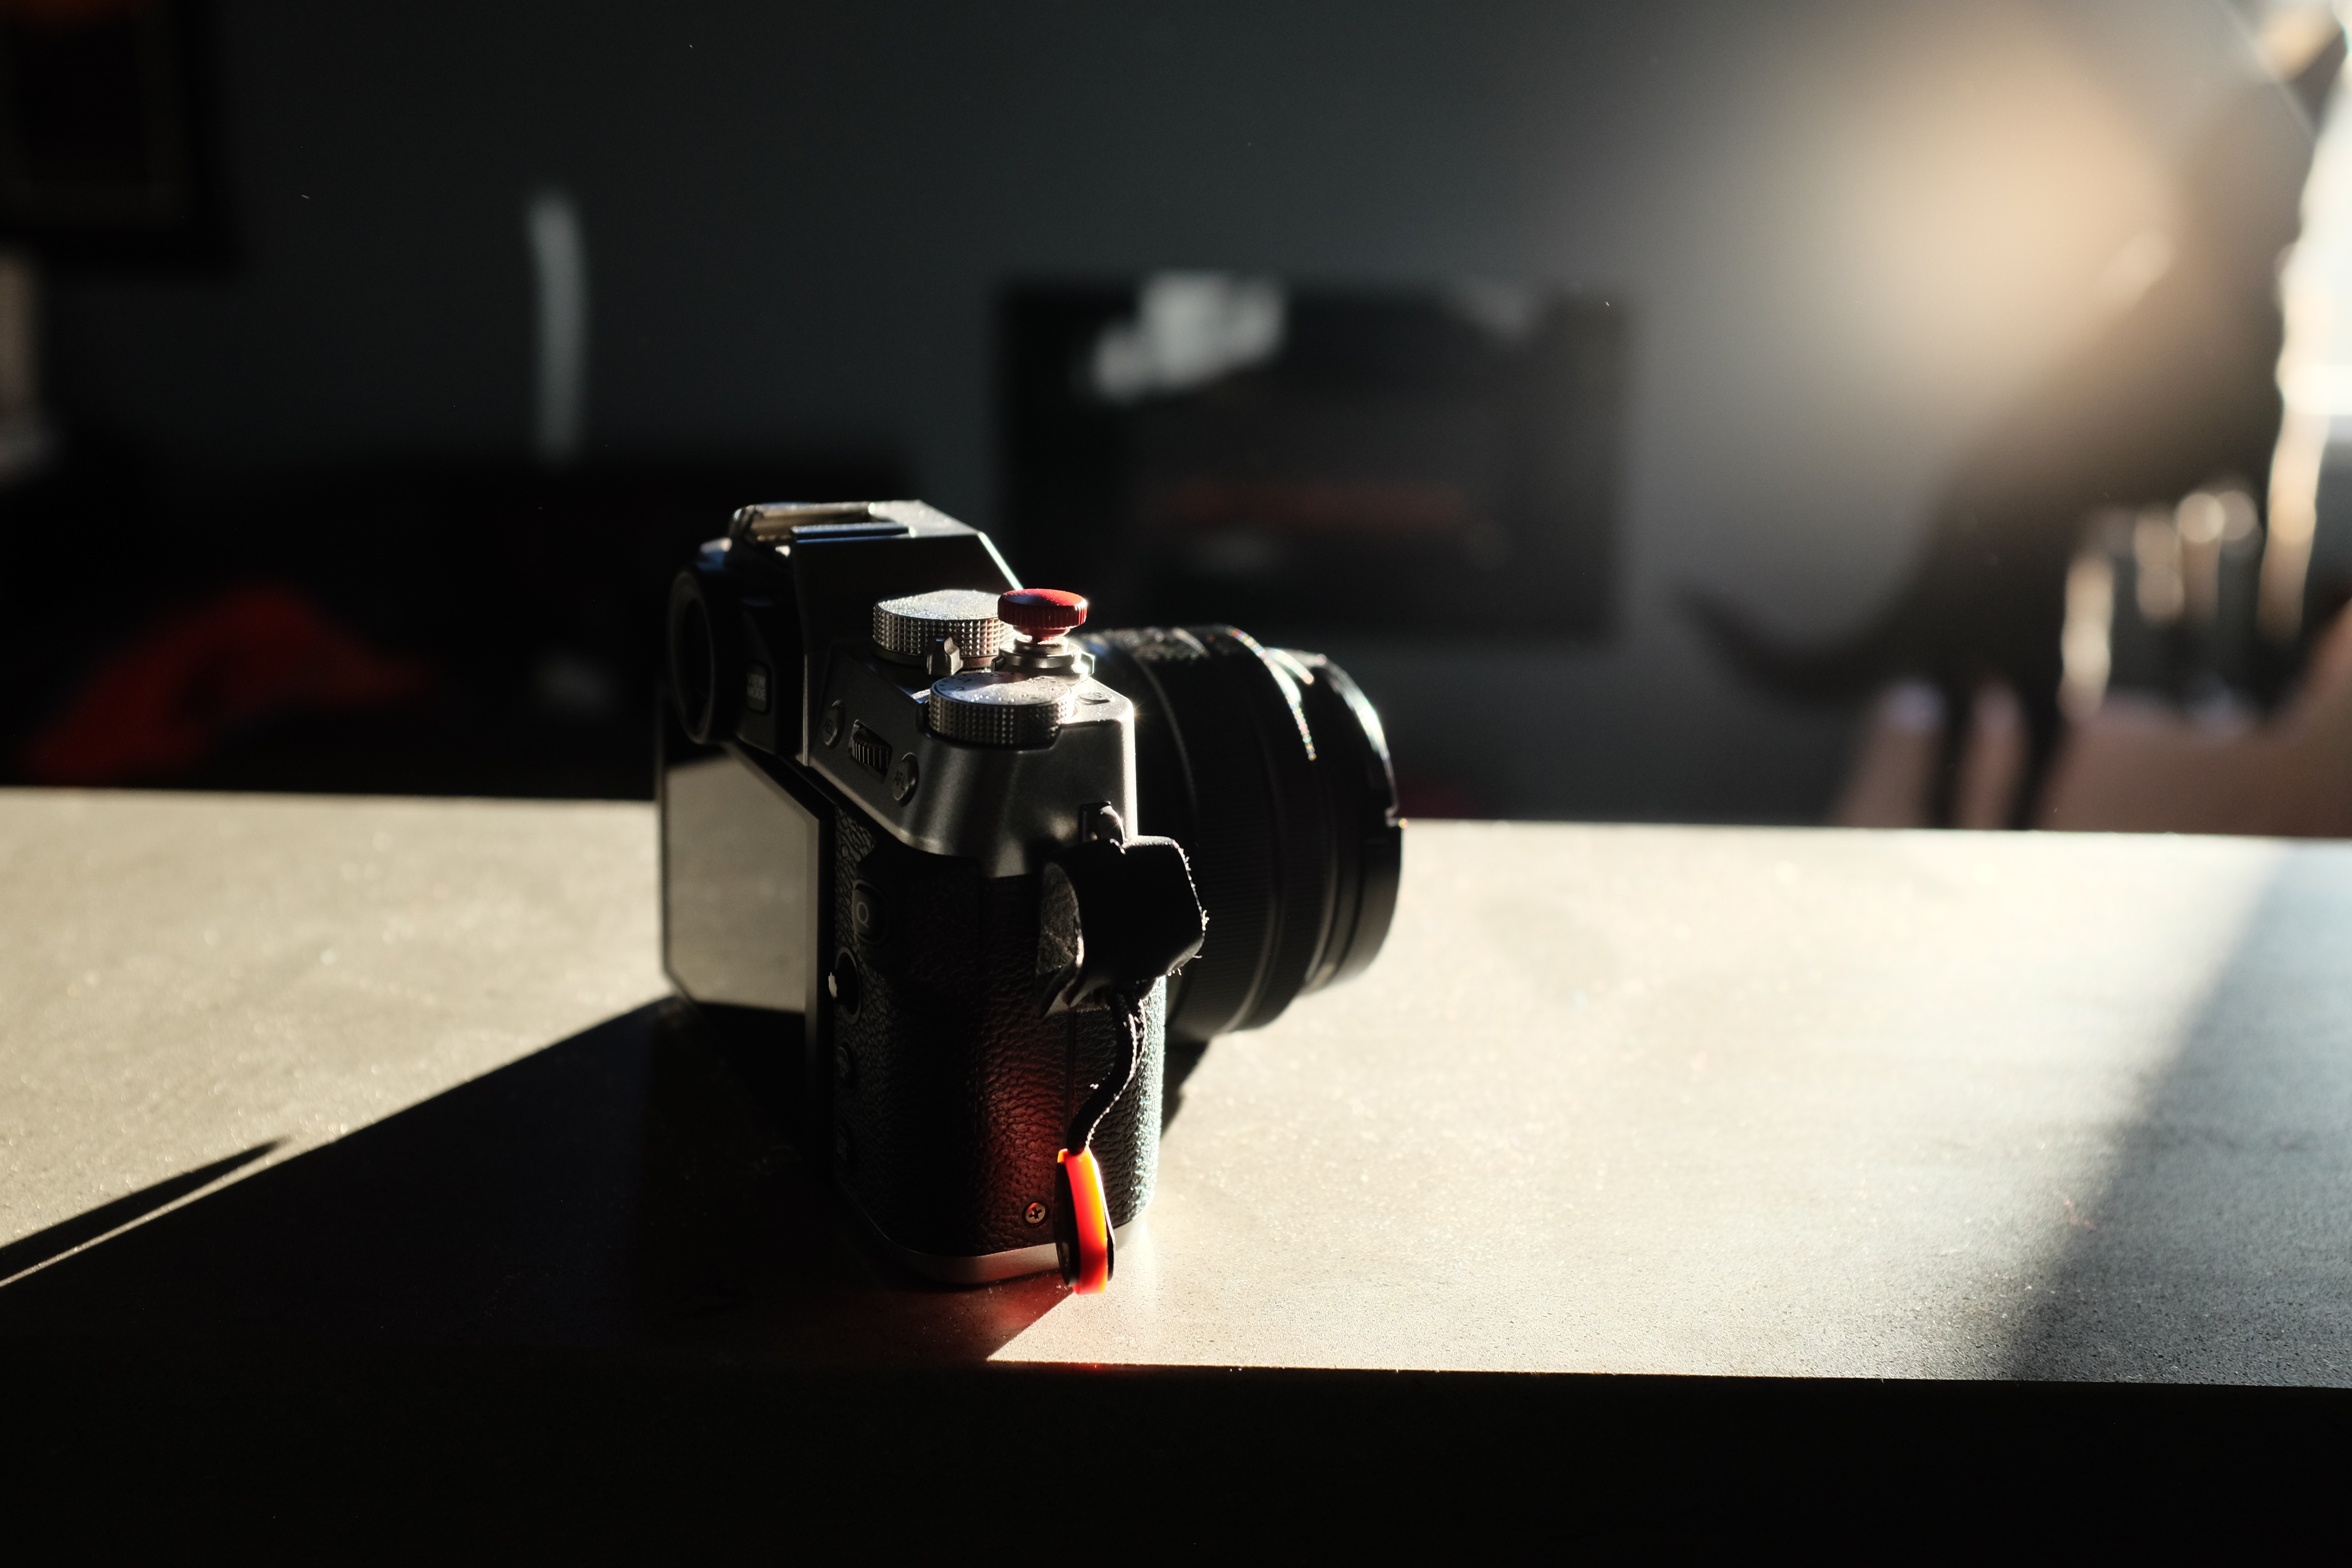 A silver and black camera sits on a bright, narrow countertop, lens pointing away. The light is bright, making the shadow very stark and deep behind the camera.